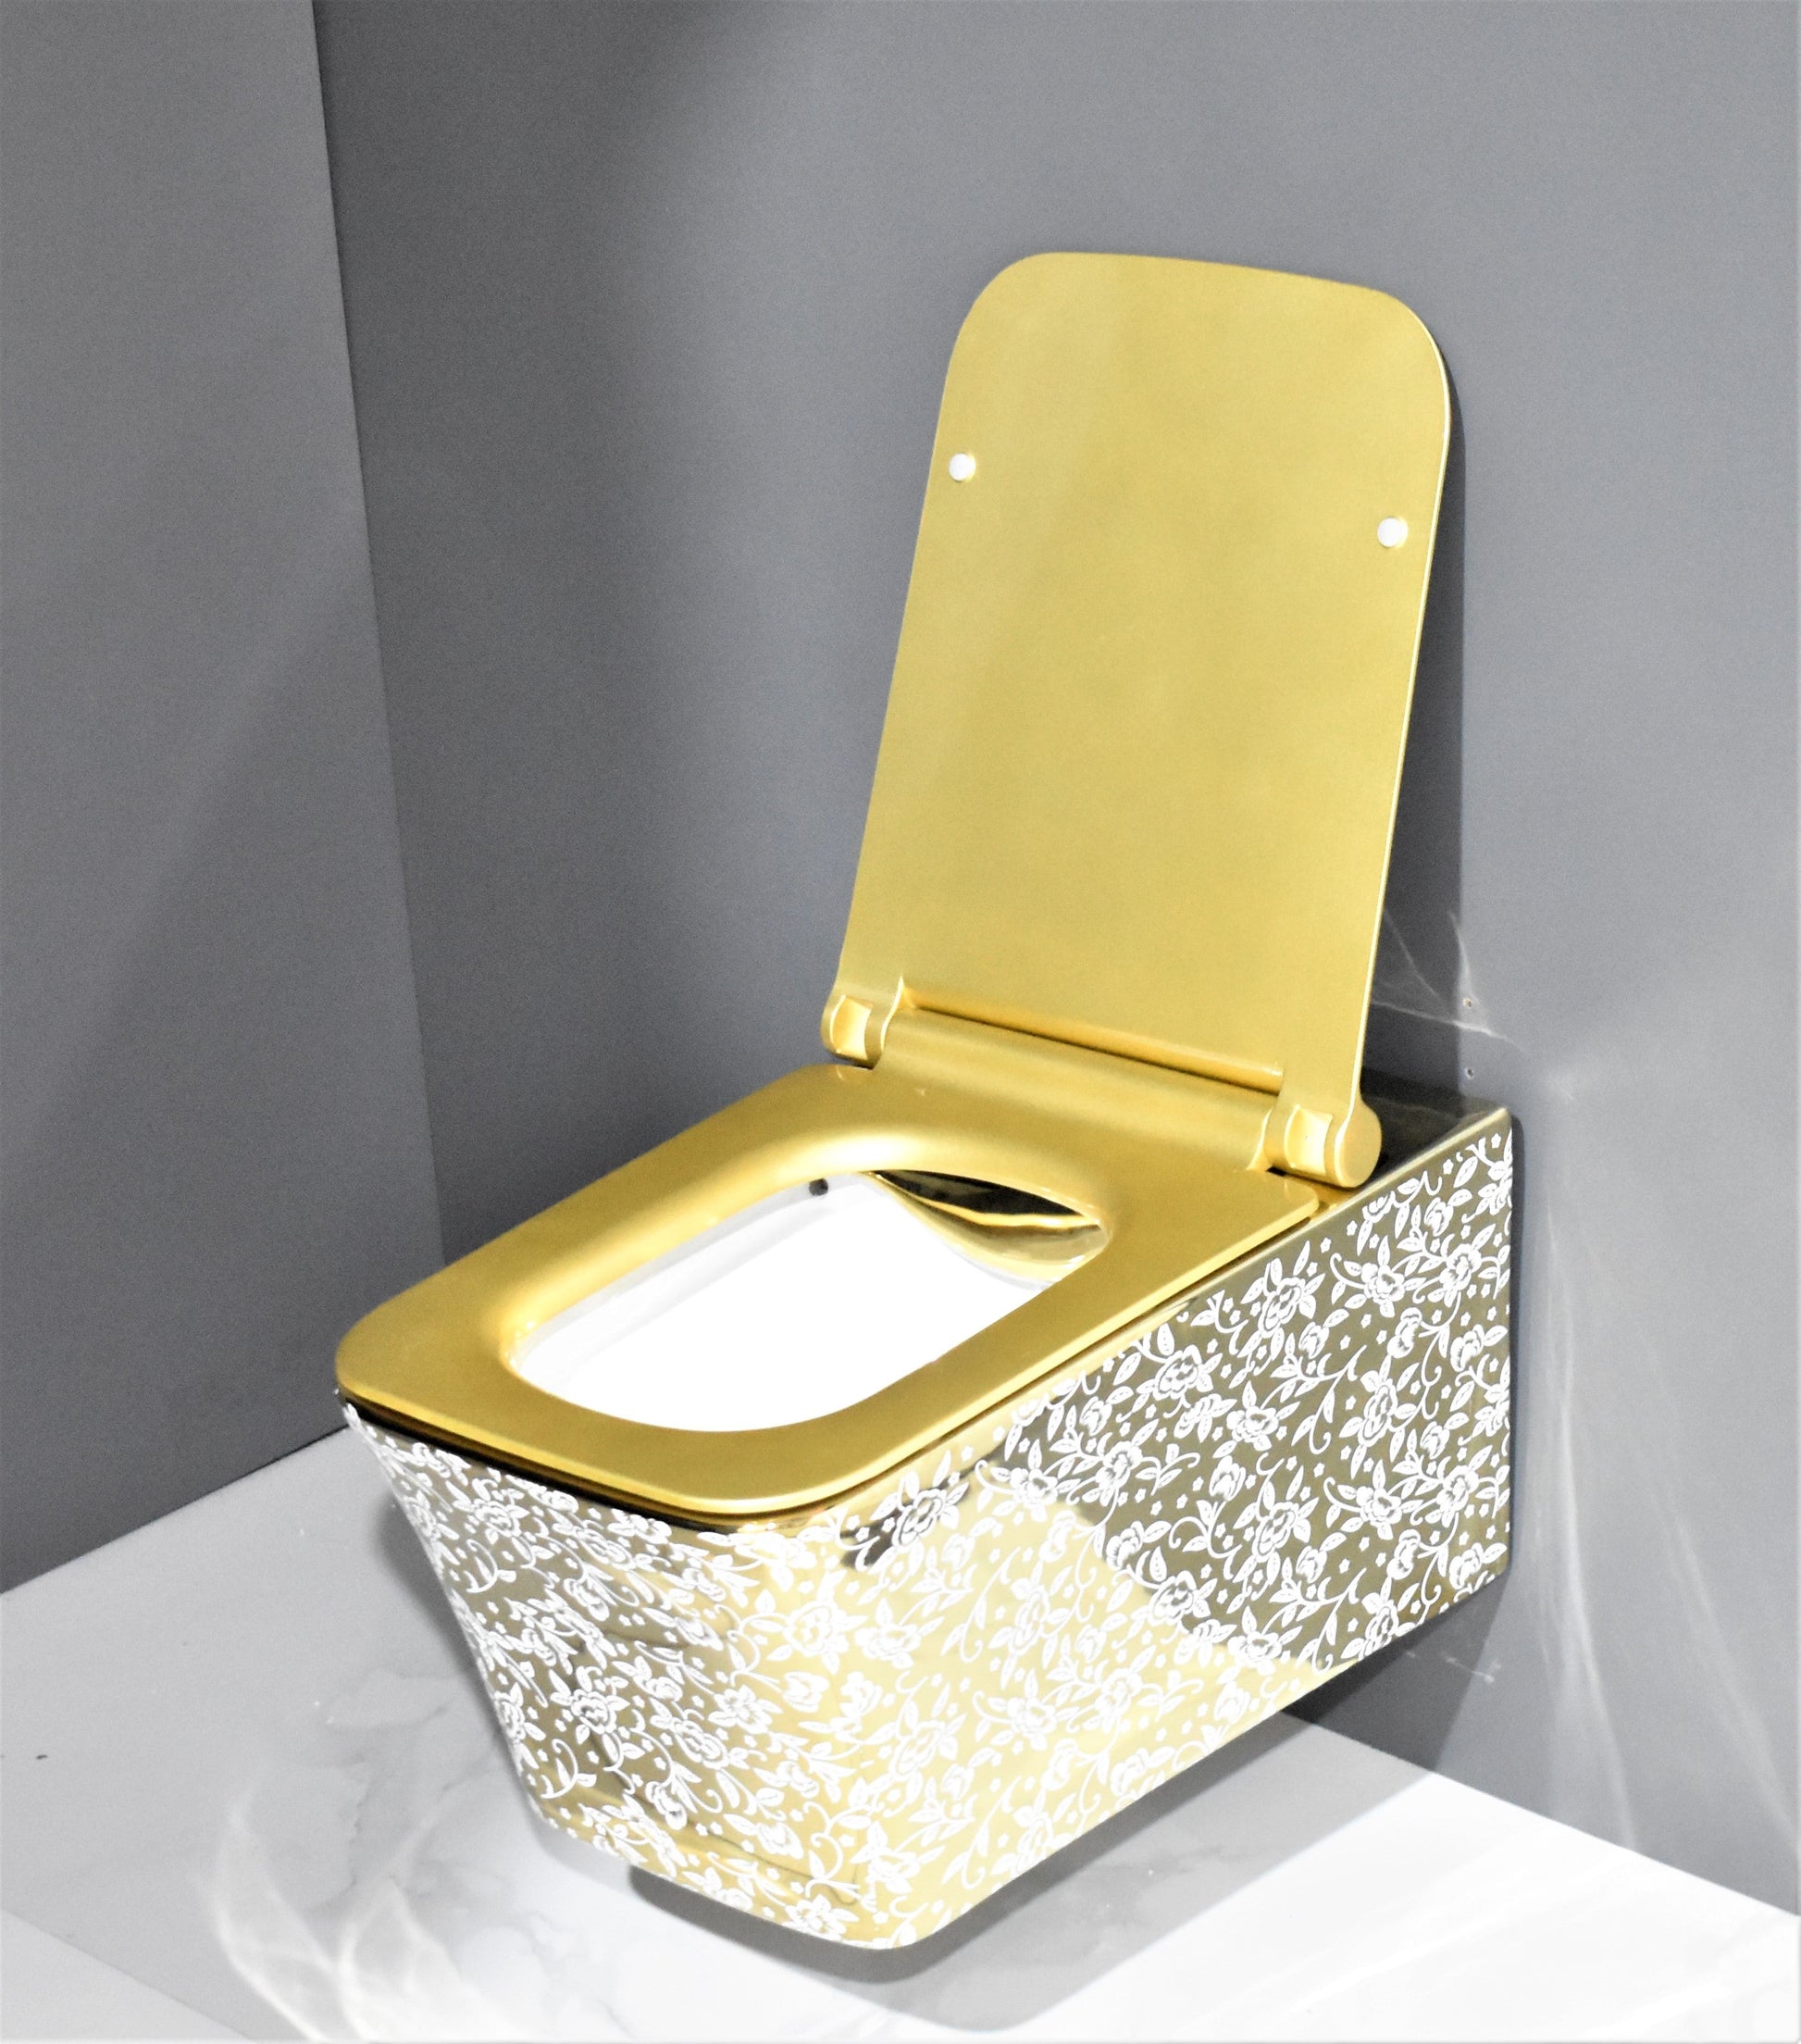 InArt Ceramic Rimless Wall Hung or Wall Mounted Water Closet Toilet with Soft Seat Cover White Gold Color - InArt-Studio